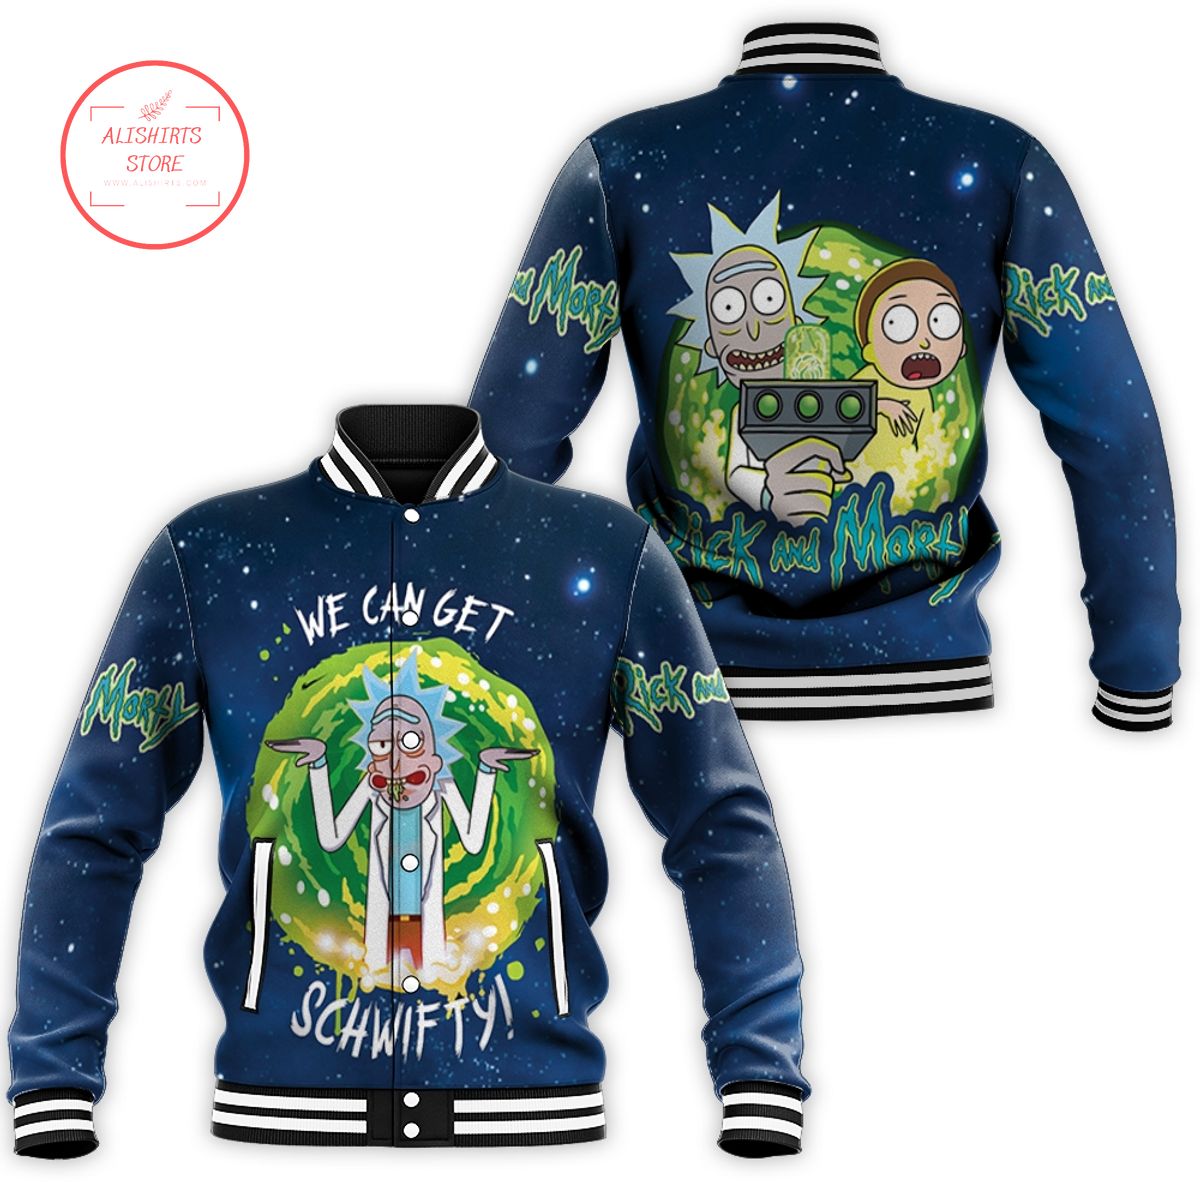 Rick And Morty We Cat Get Schwifty Dark Navy Rick And Morty varsity jacket